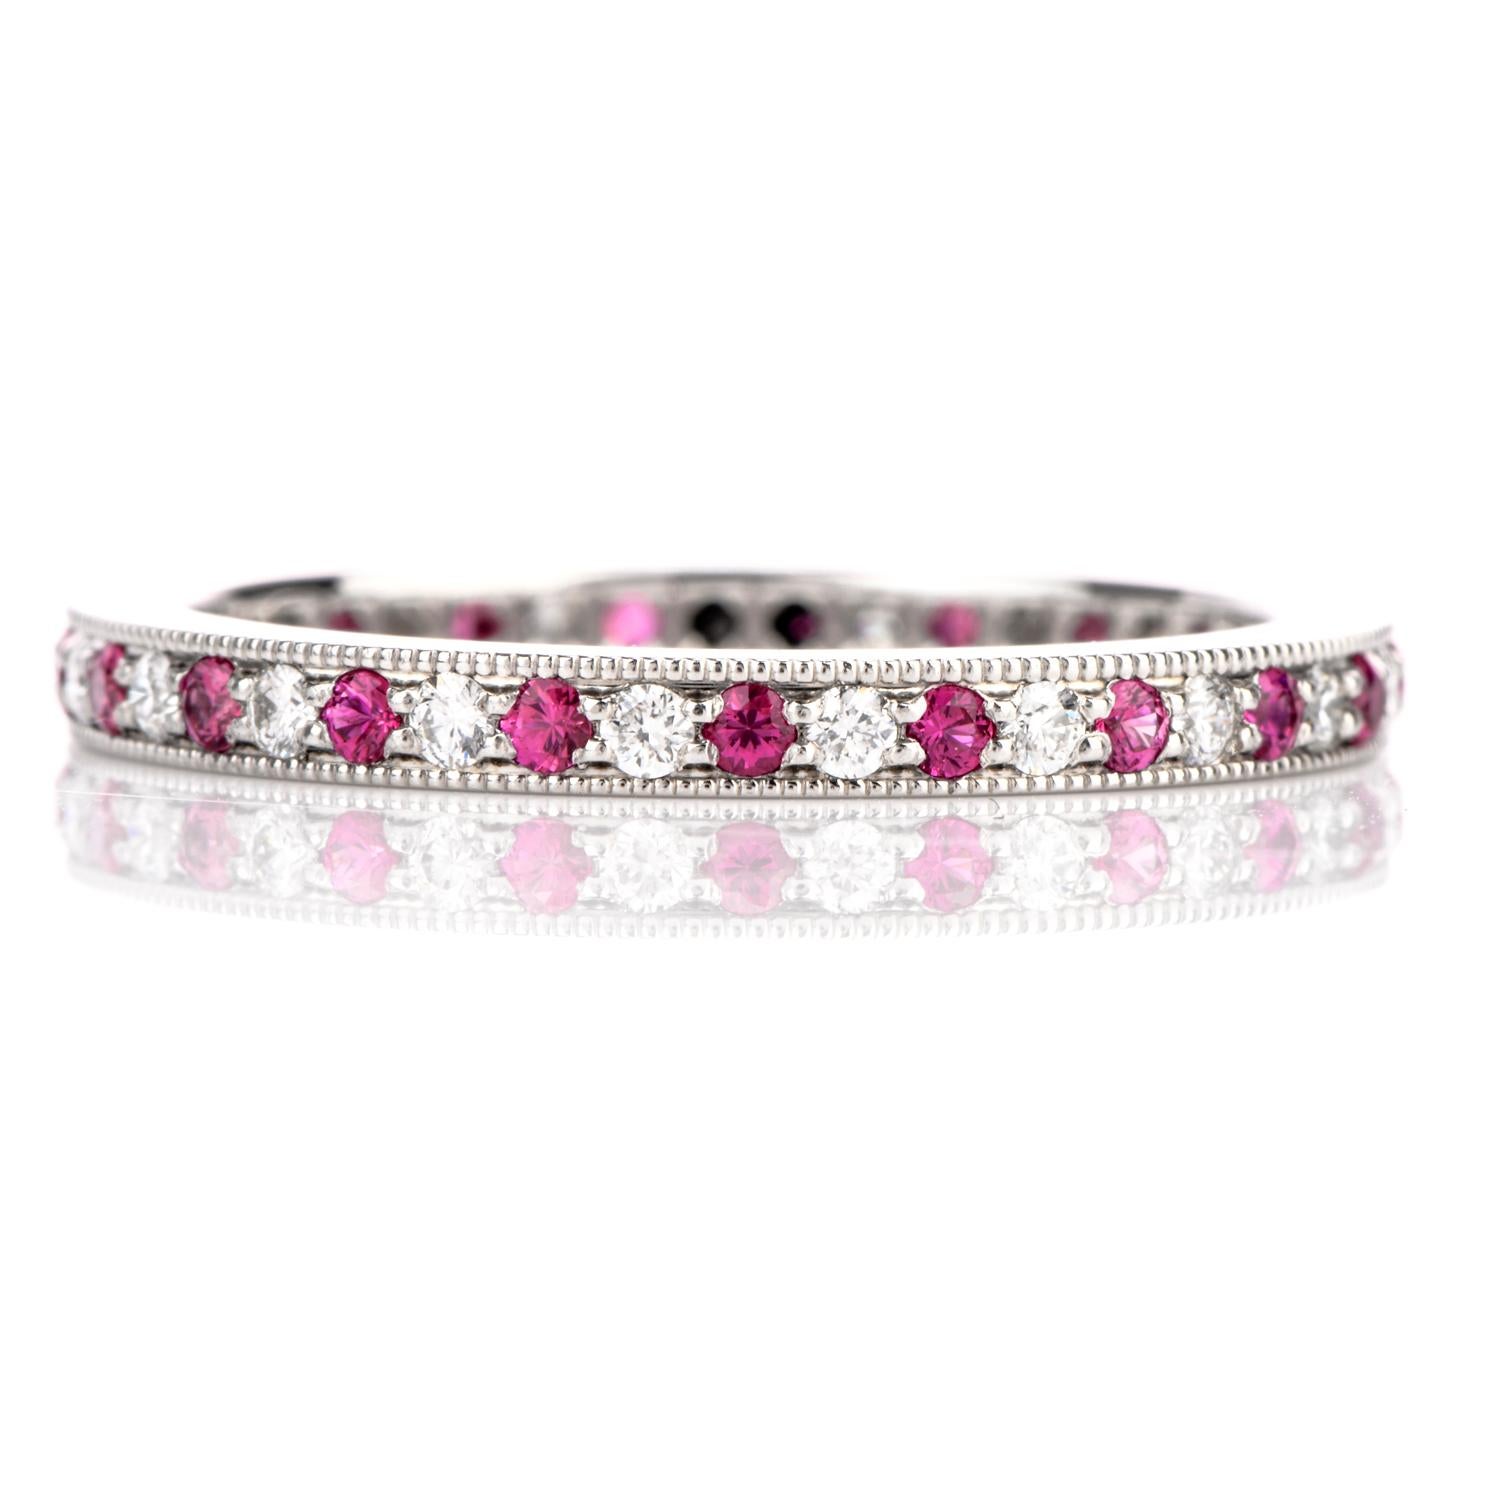 This Timeless Legacy Collection Tiffany and Co Diamond and Pink Sapphire Eternity Band is crafted in 

luxurious Platinum . Alternating completely around this ring are prongset Diamonds and Pink Sapphire cuddled by

a soft beaded edge to finish the